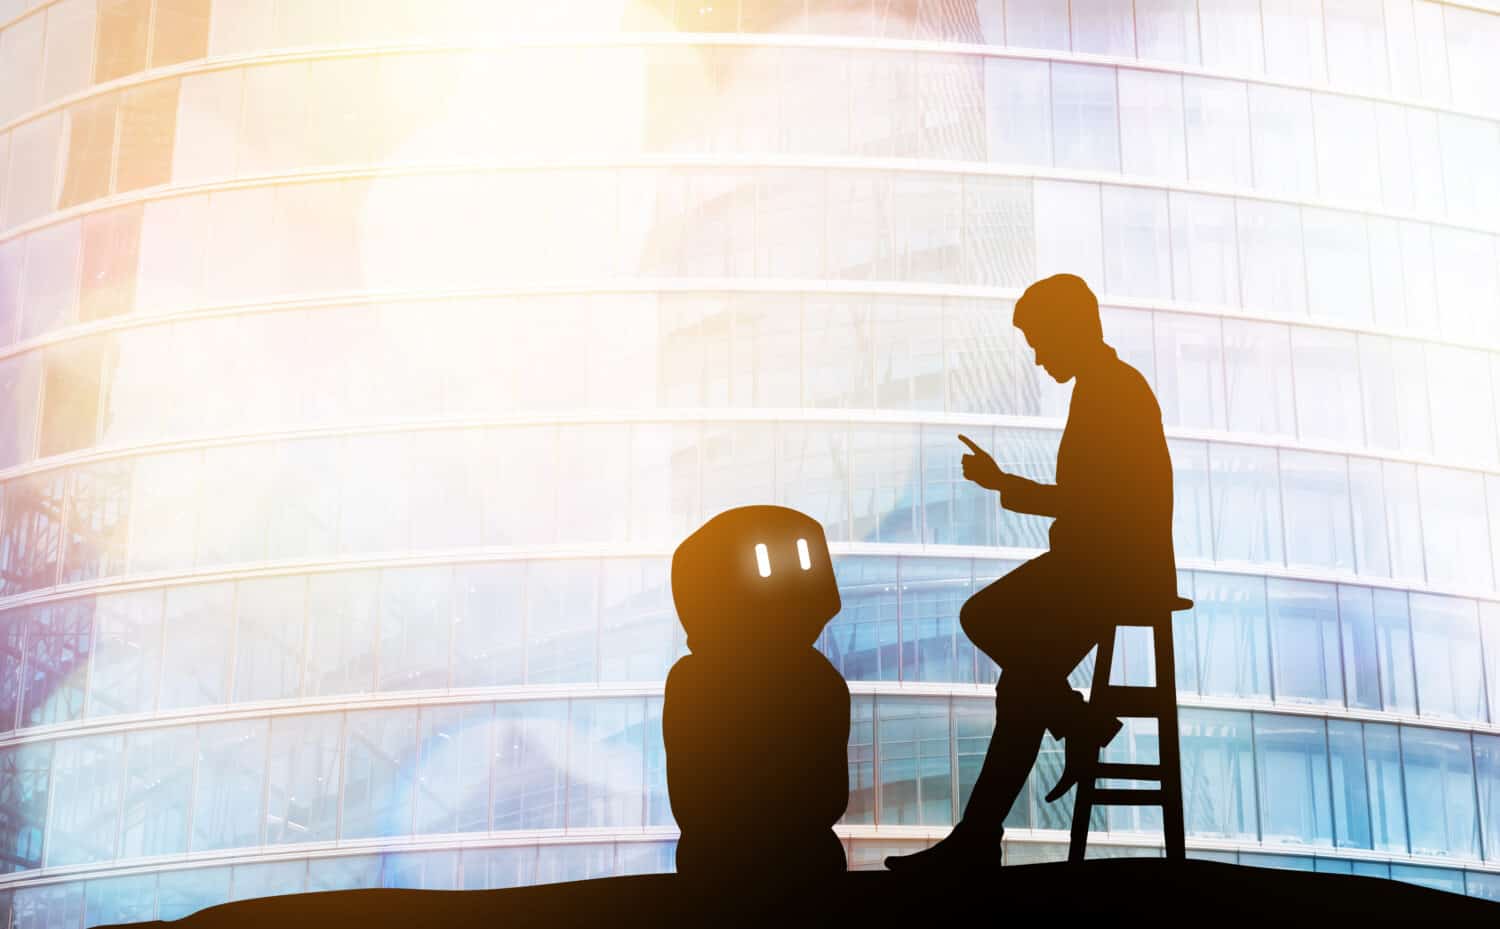 Robot assistant technology , industry 4.0 , artificial intelligence trend concept. Silhouette of business man talking to automation robo advisor. Bokeh flare light effect with building background.